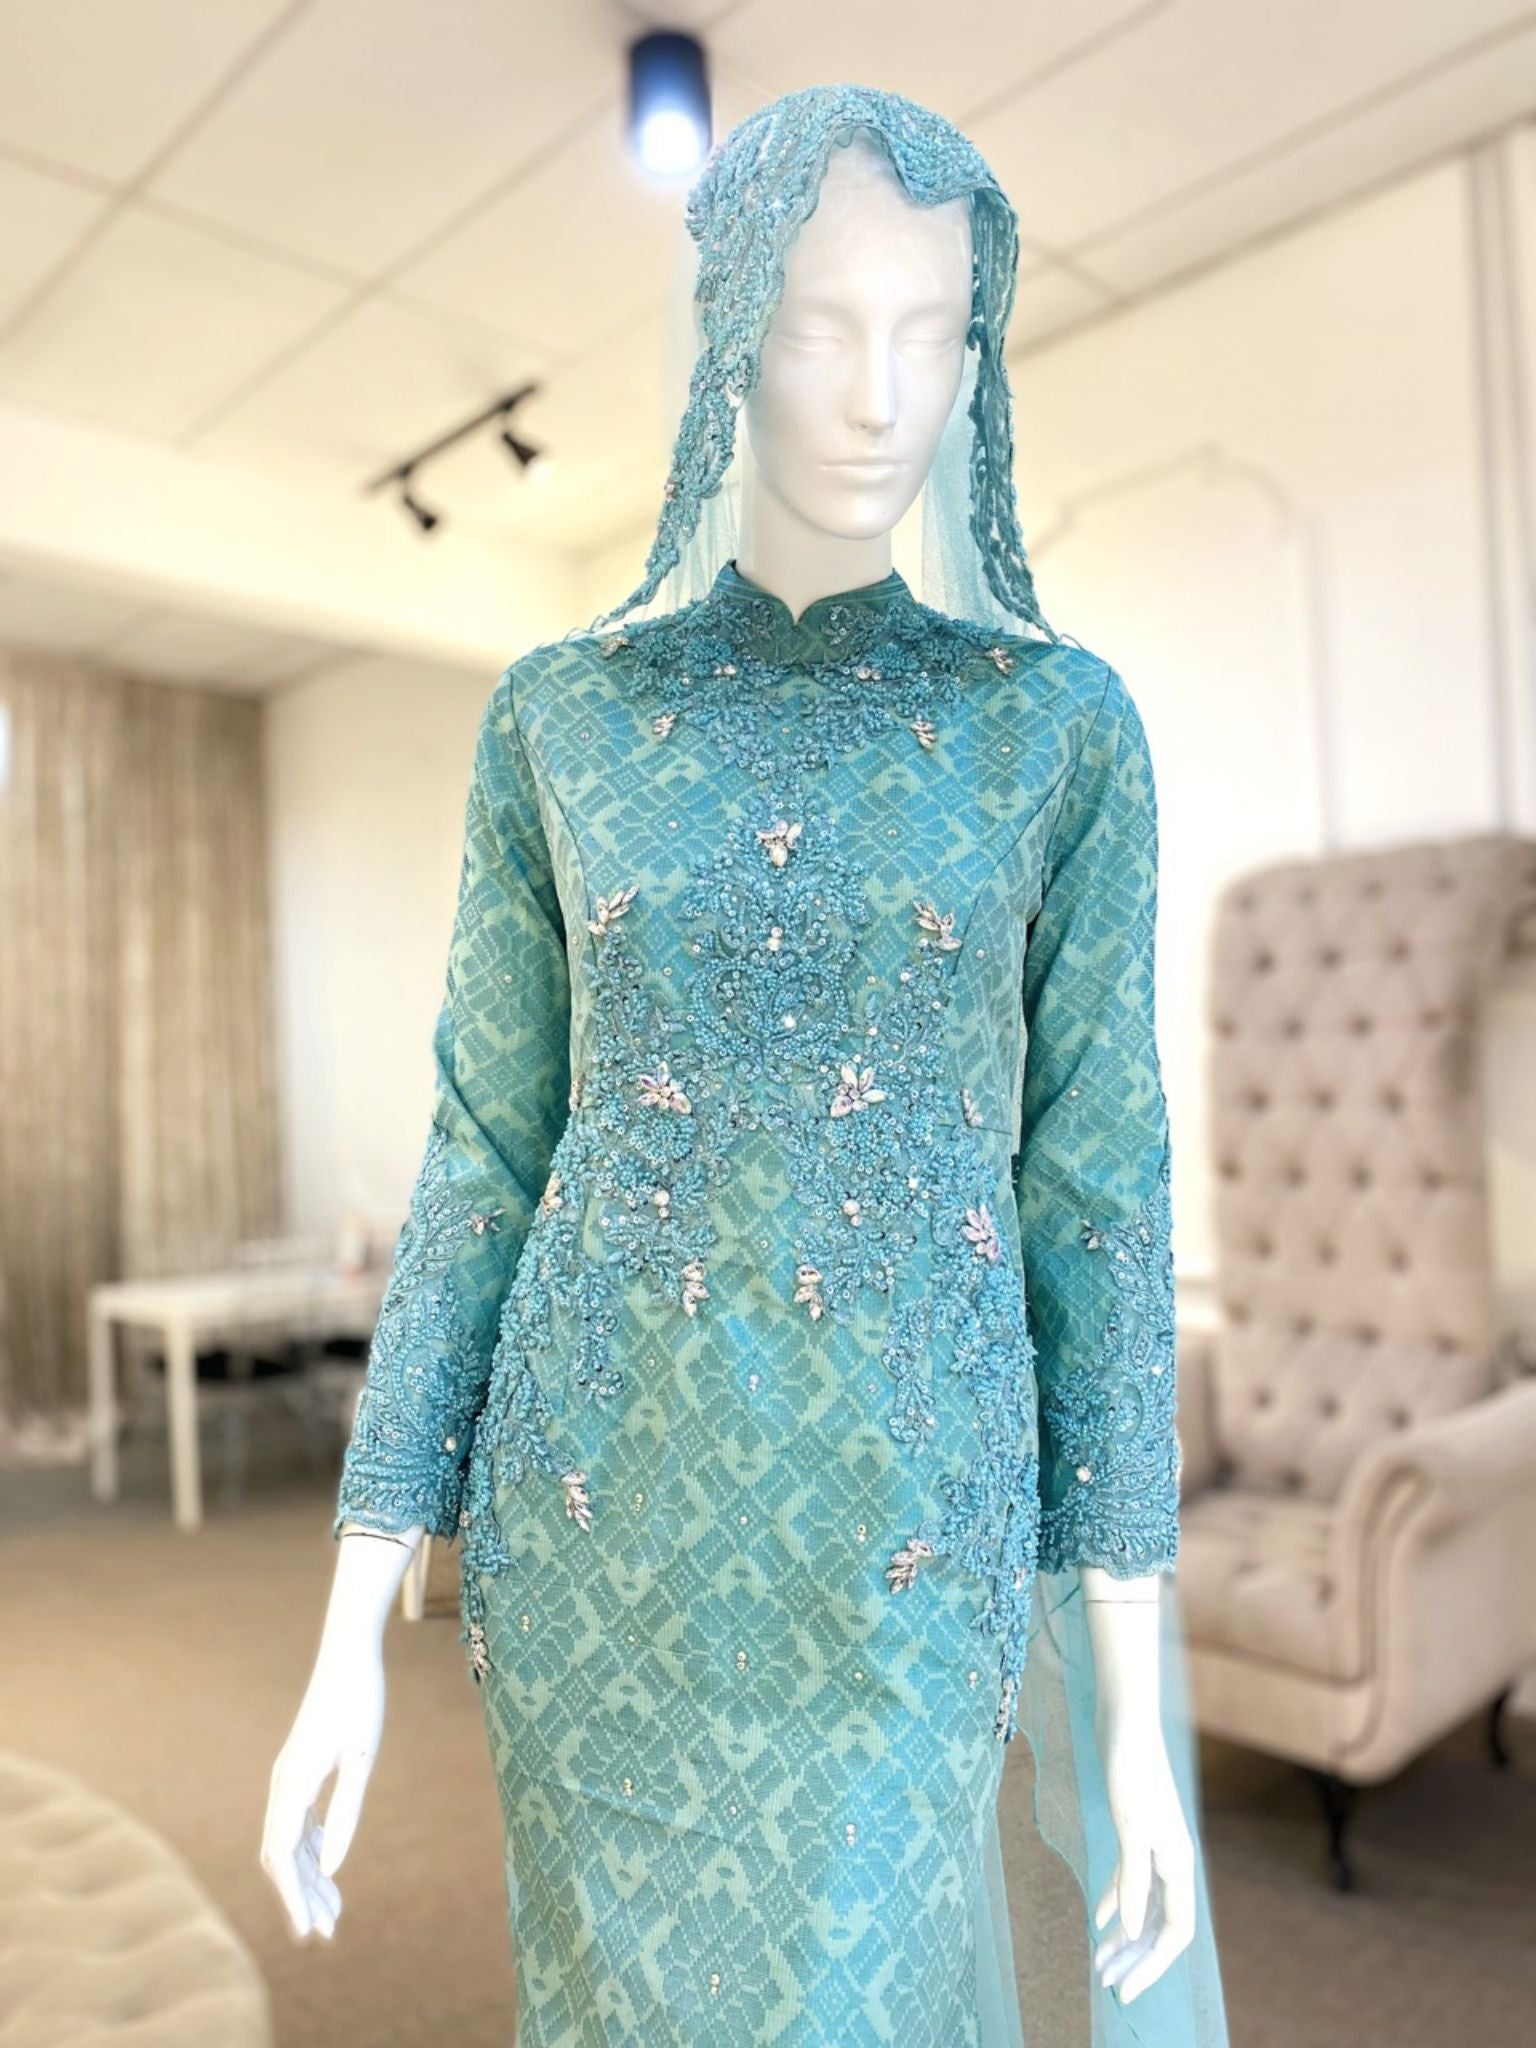 Tiffany is a stunning baby blue & turquoise songket 2D trumpet wedding dress that is perfect for the modern bride. With its elegant design and flattering fit, Tiffany is sure to turn heads on your big day. Made from luxurious songket 2D fabric, this dress is the perfect way to celebrate your special day.